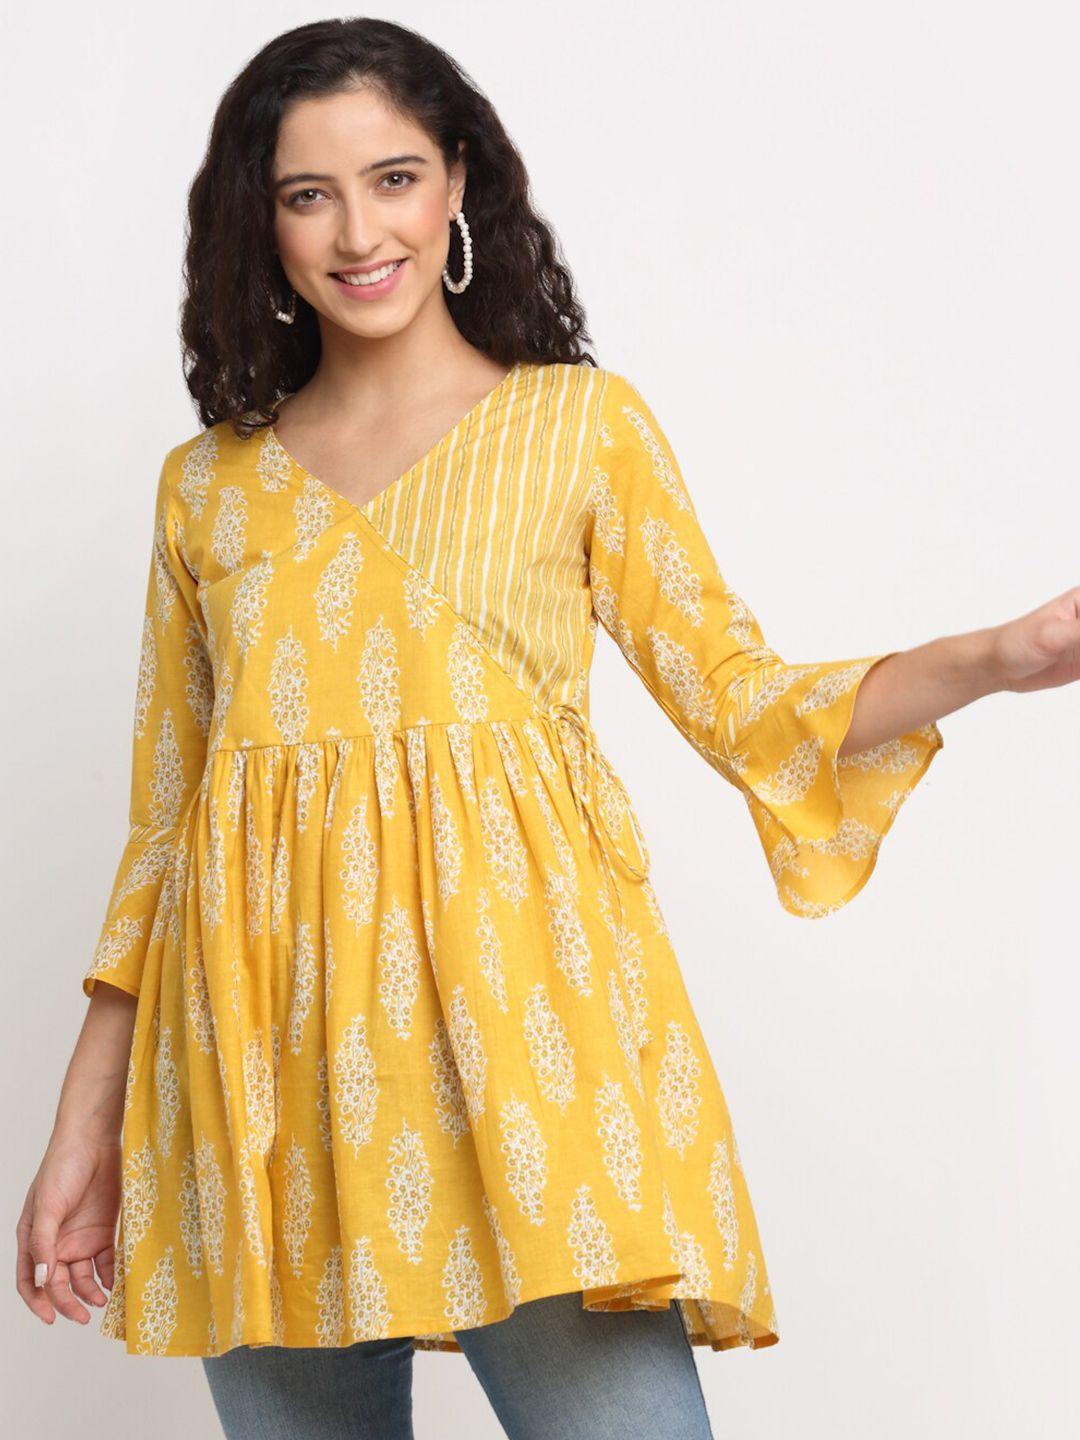 kalini yellow & white floral printed empire longline top